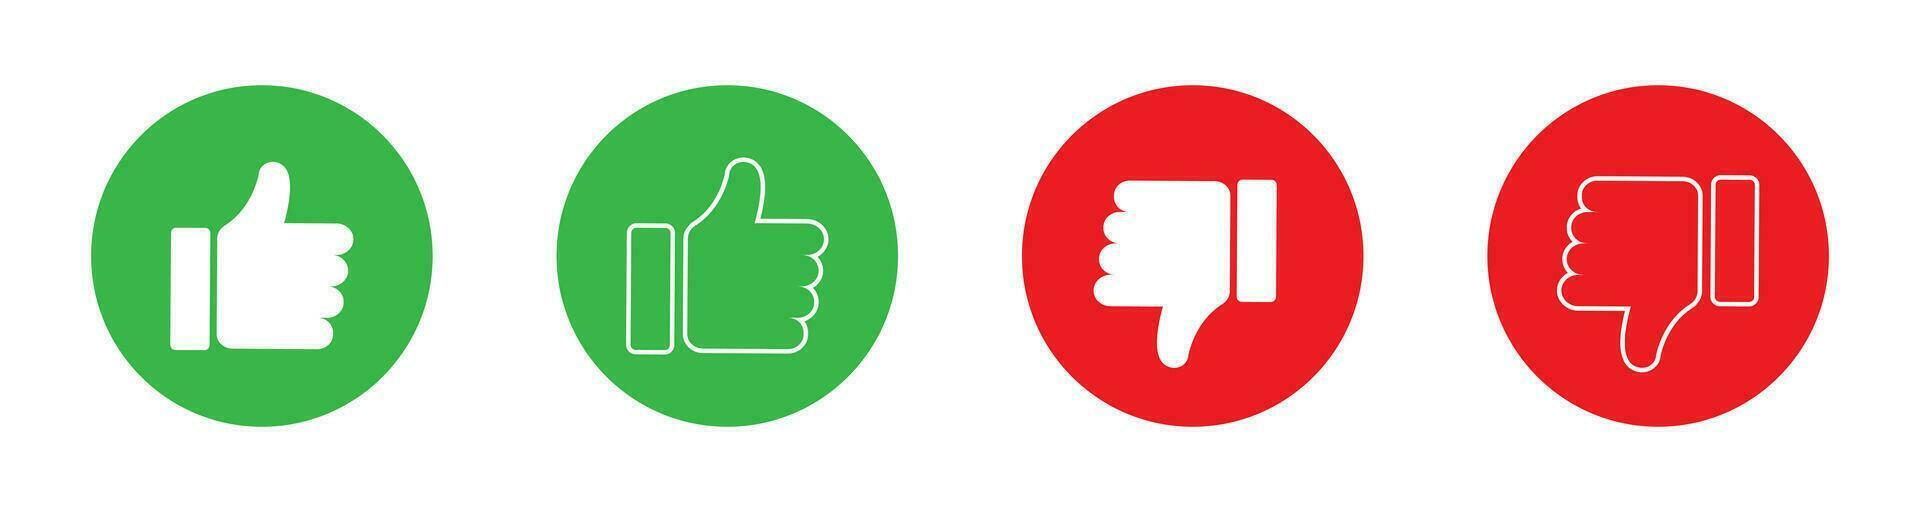 Thumbs up and down in green and red. Isolated good and bad sign on white background. Flat negative and positive symbol. Like and dislike sign. Round pictogram with hand. Vector EPS 10.